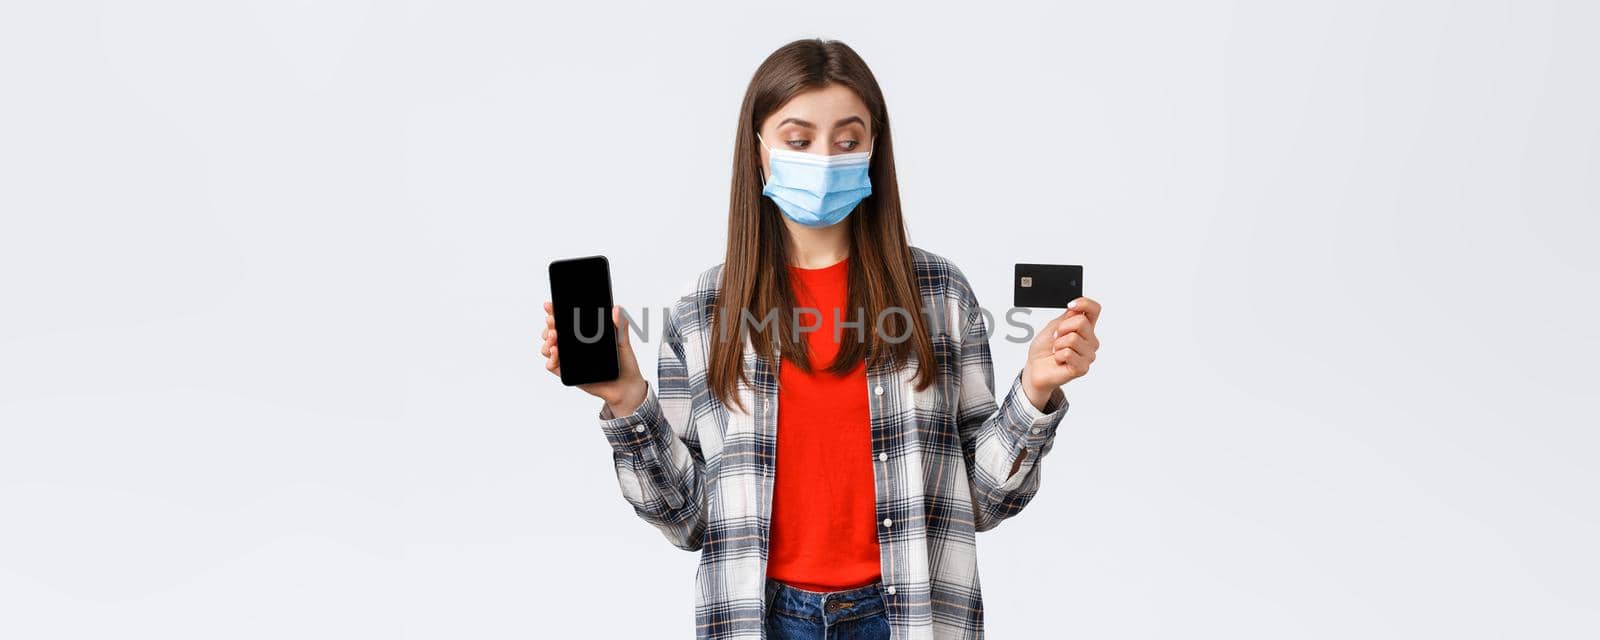 Coronavirus outbreak, working from home, online shopping and contactless payment concept. Girl in medical mask look at credit card as show mobile phone screen, making order.